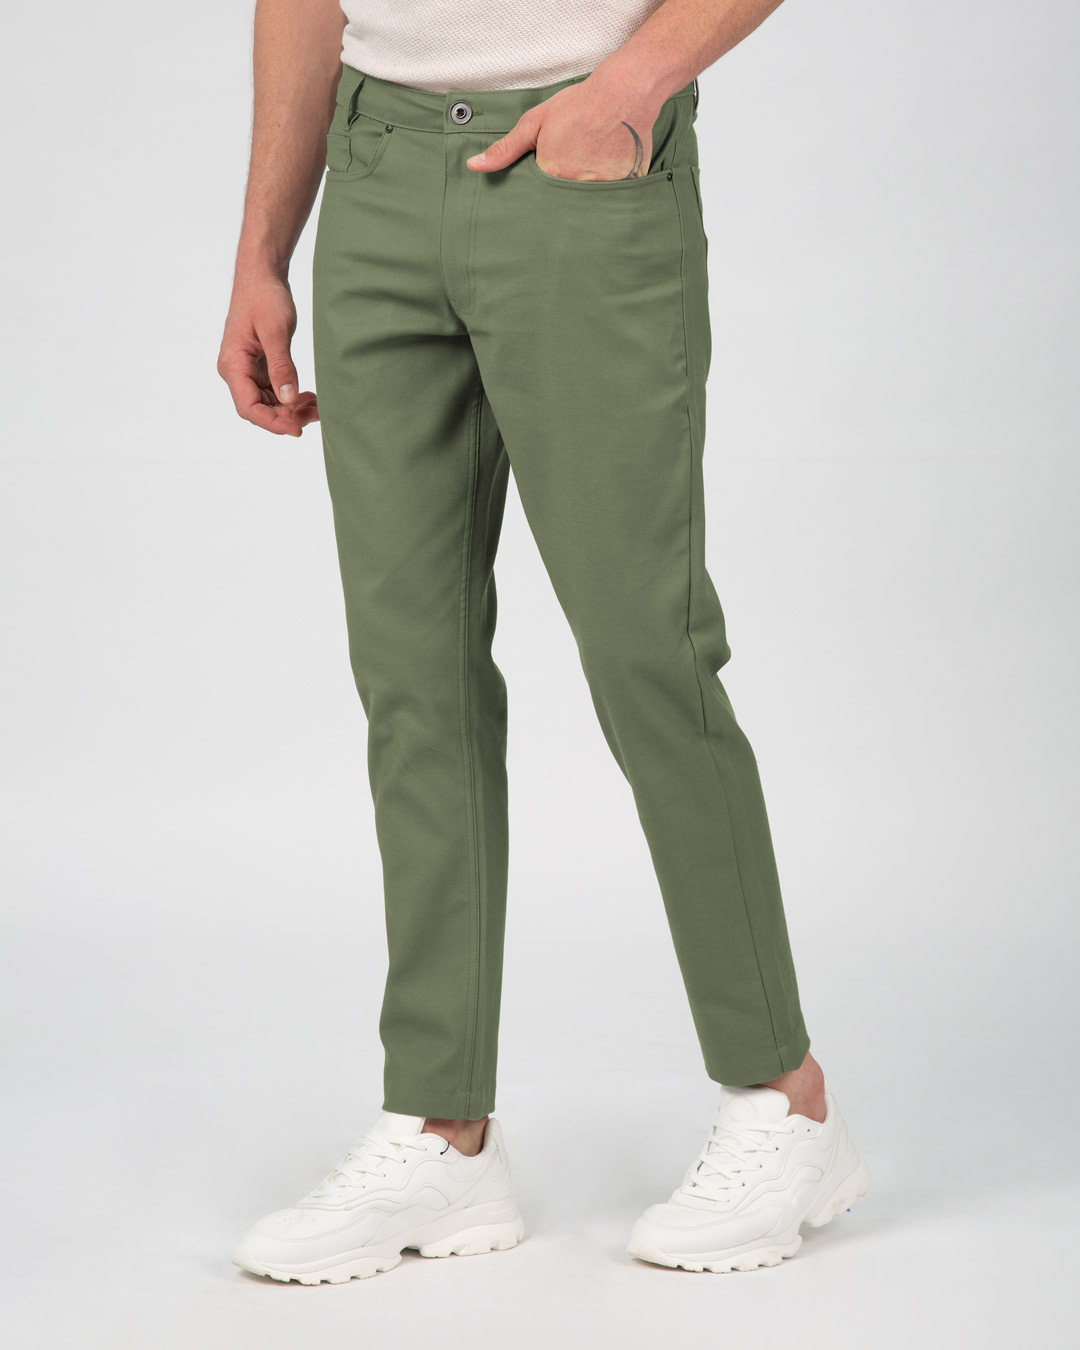 Buy PISTA GREEN Trousers  Pants for Men by Byford by Pantaloons Online   Ajiocom